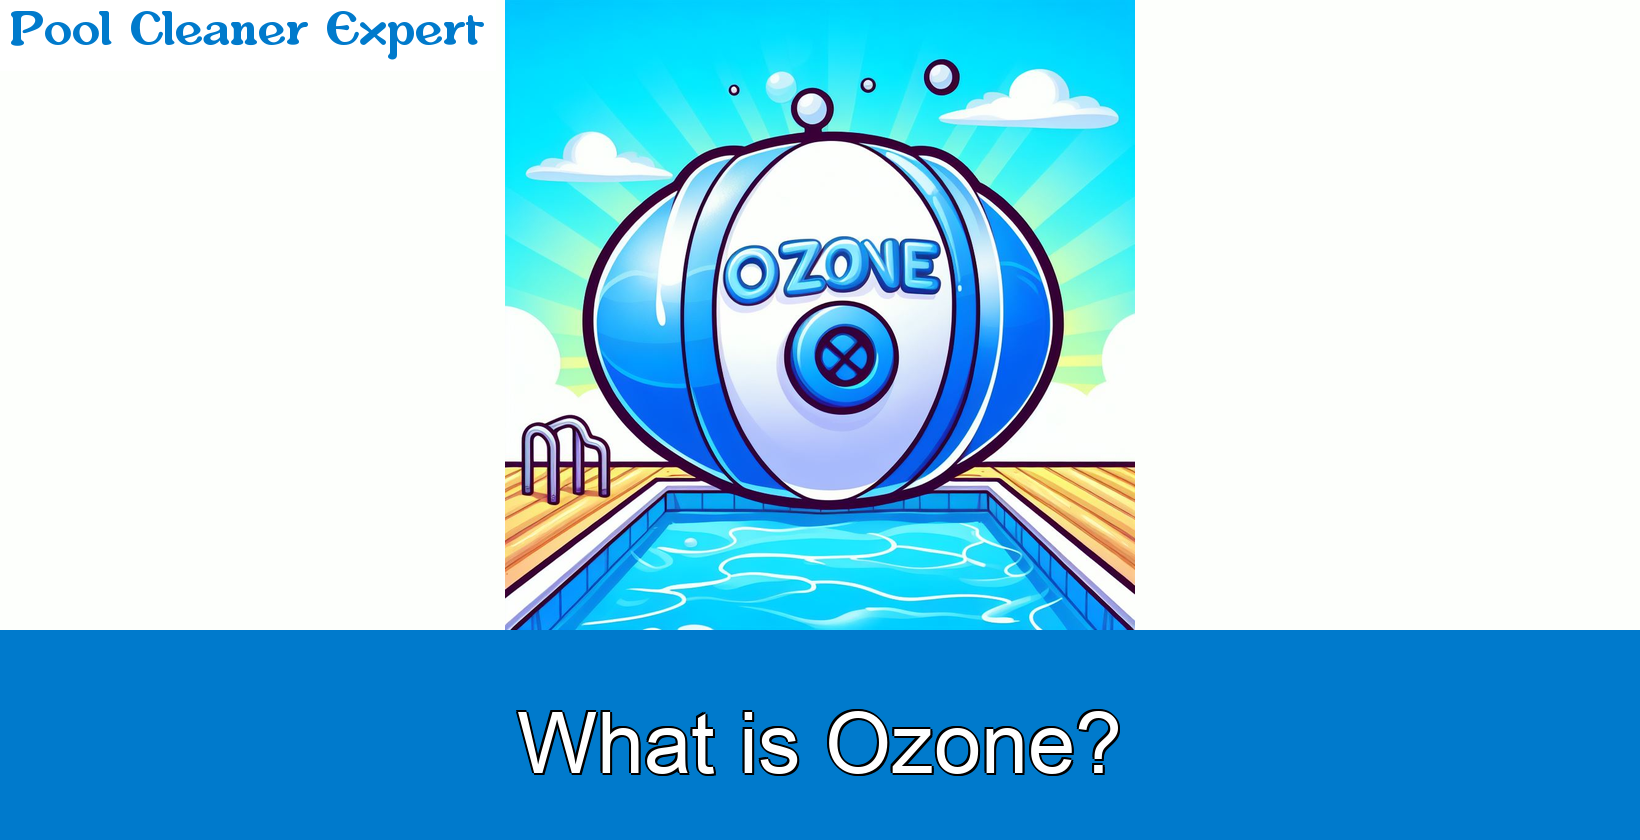 Ozone in Pools: All You Need to Know